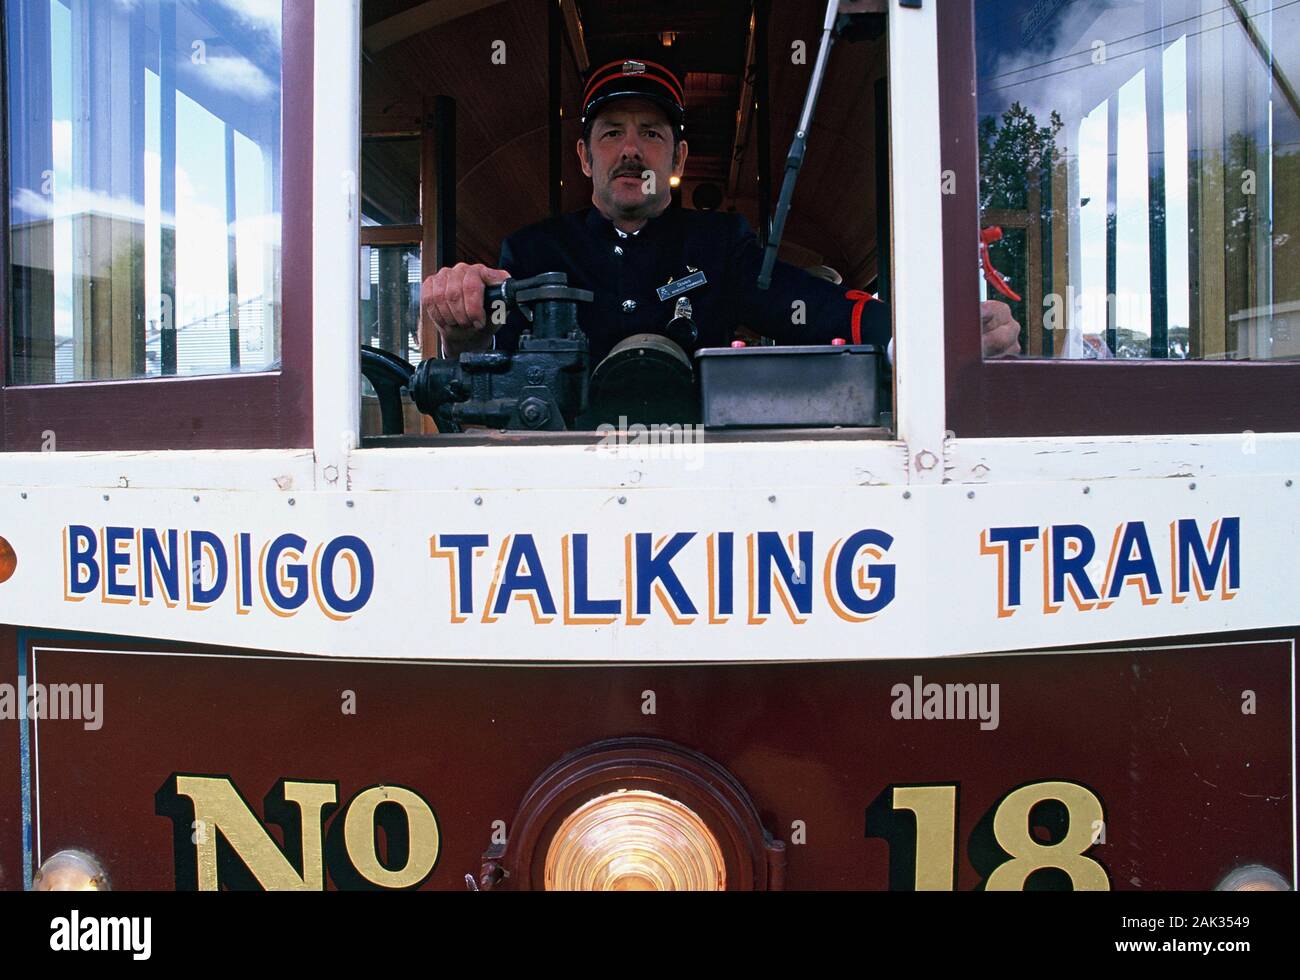 View of a historic tramway, called Bendigo Talking Tram and the tramway driver in Bendigo in Victoria, Australia.  (undated picture) | usage worldwide Stock Photo